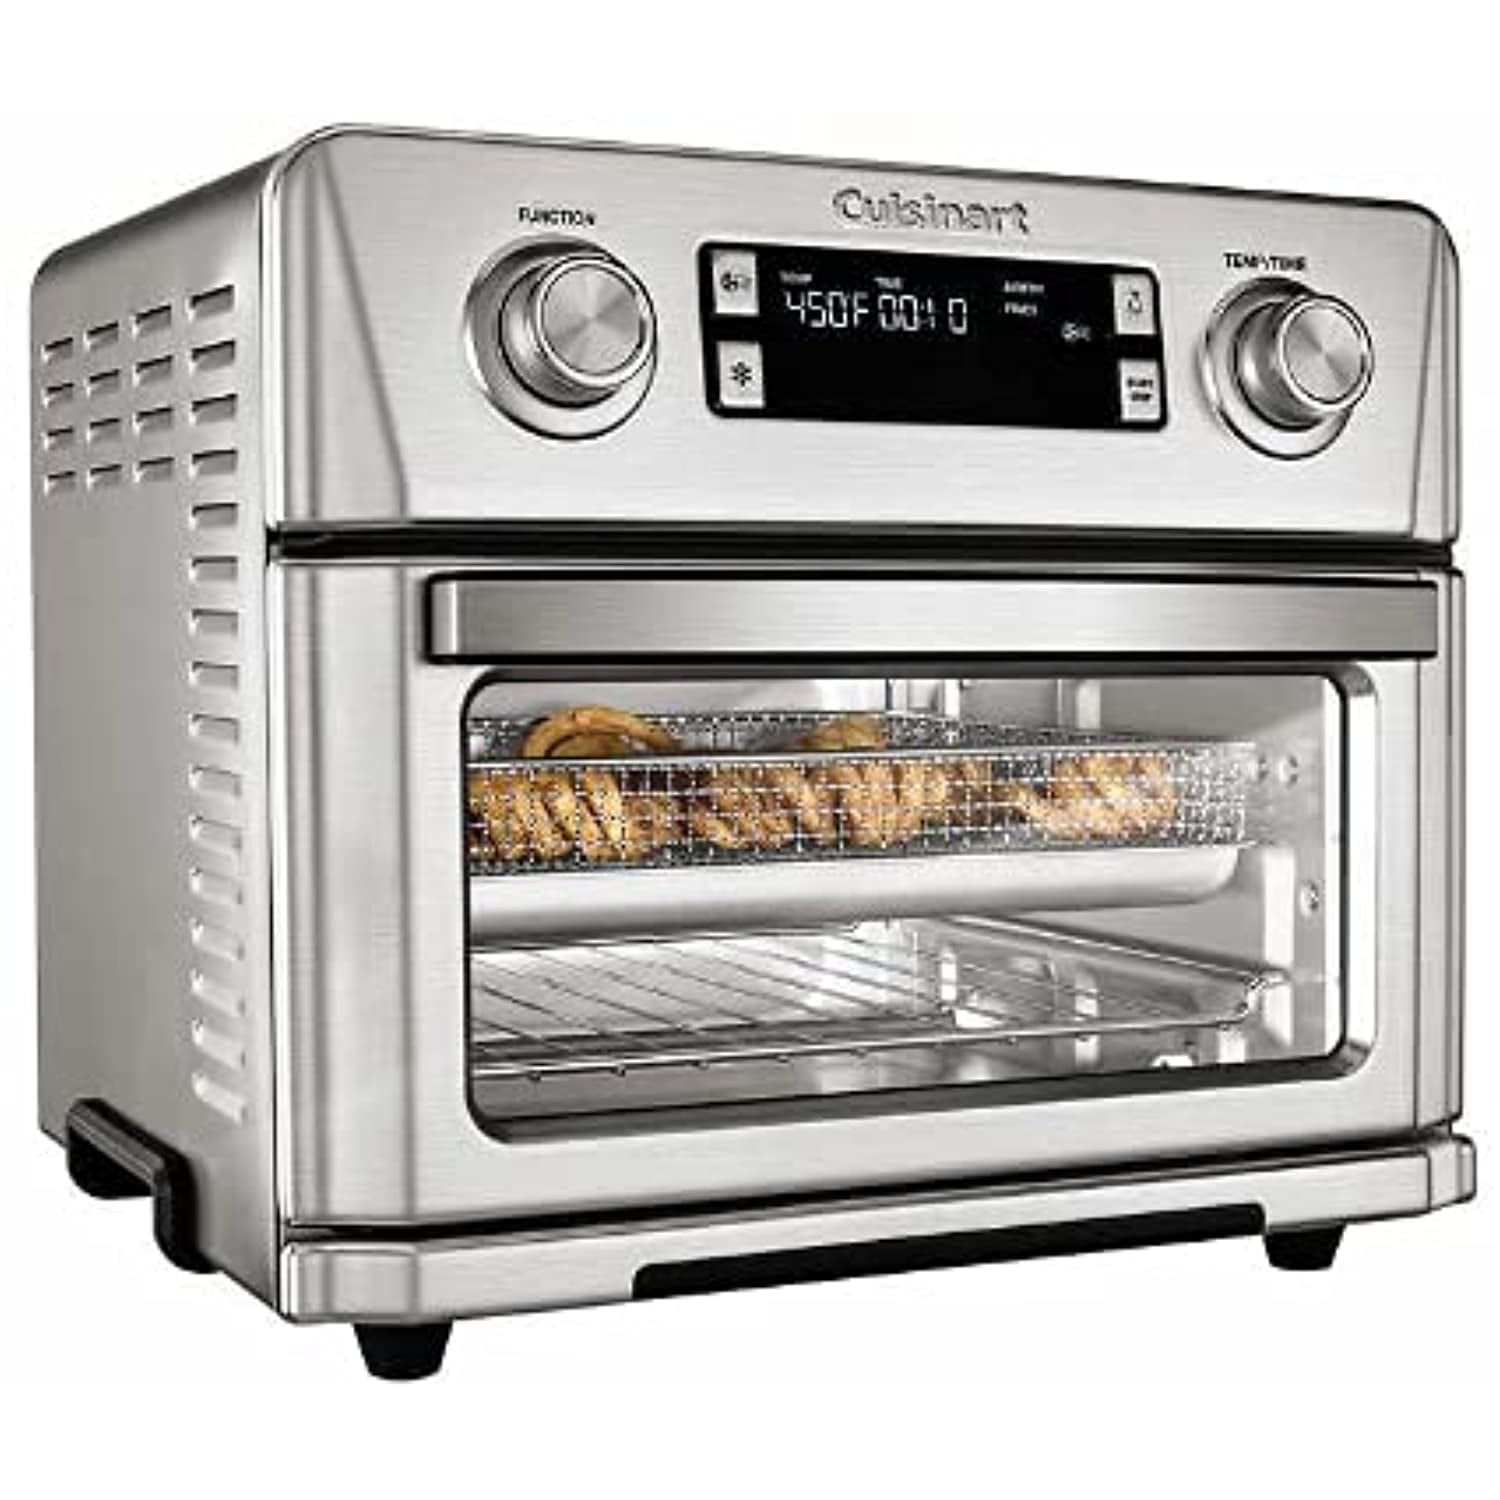 CTOA-130PC3 Manual: Your Complete Guide to Cuisinart Digital AirFryer  Toaster Oven